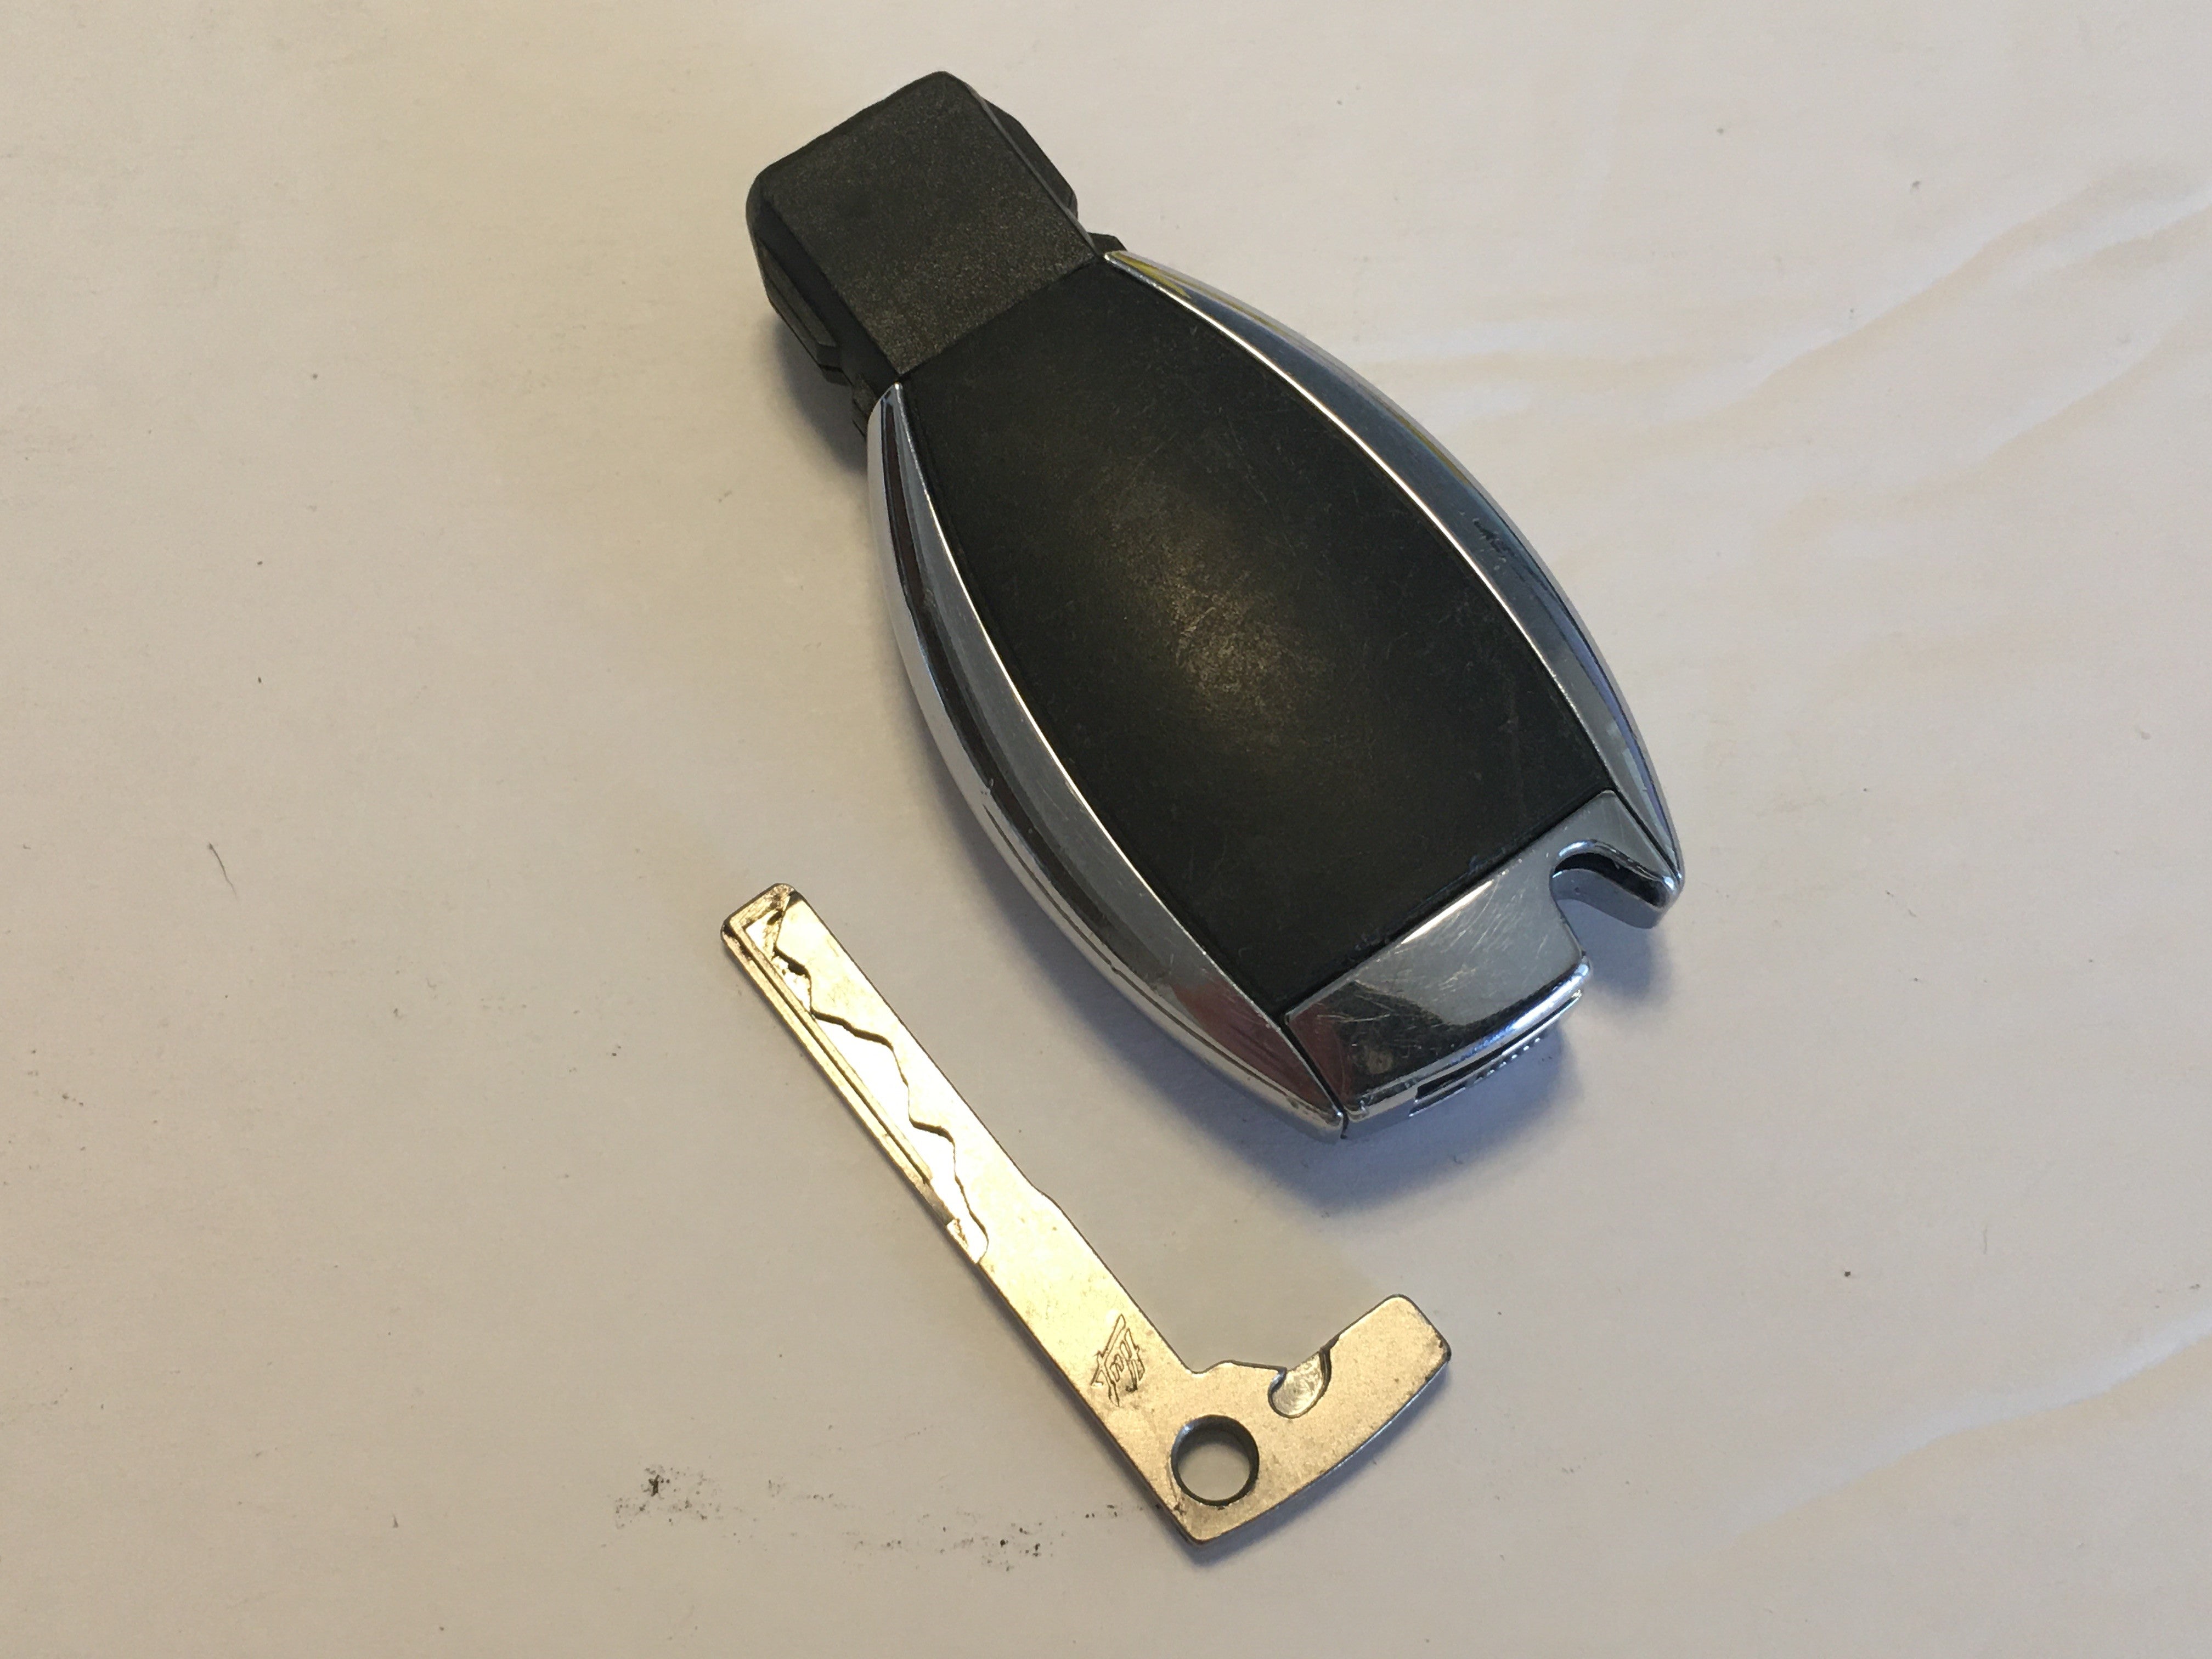 2019 Mercedes-Benz  Keyless Entry Remote Ygohuf4762 4 Buttons - Oemusedautoparts1.com